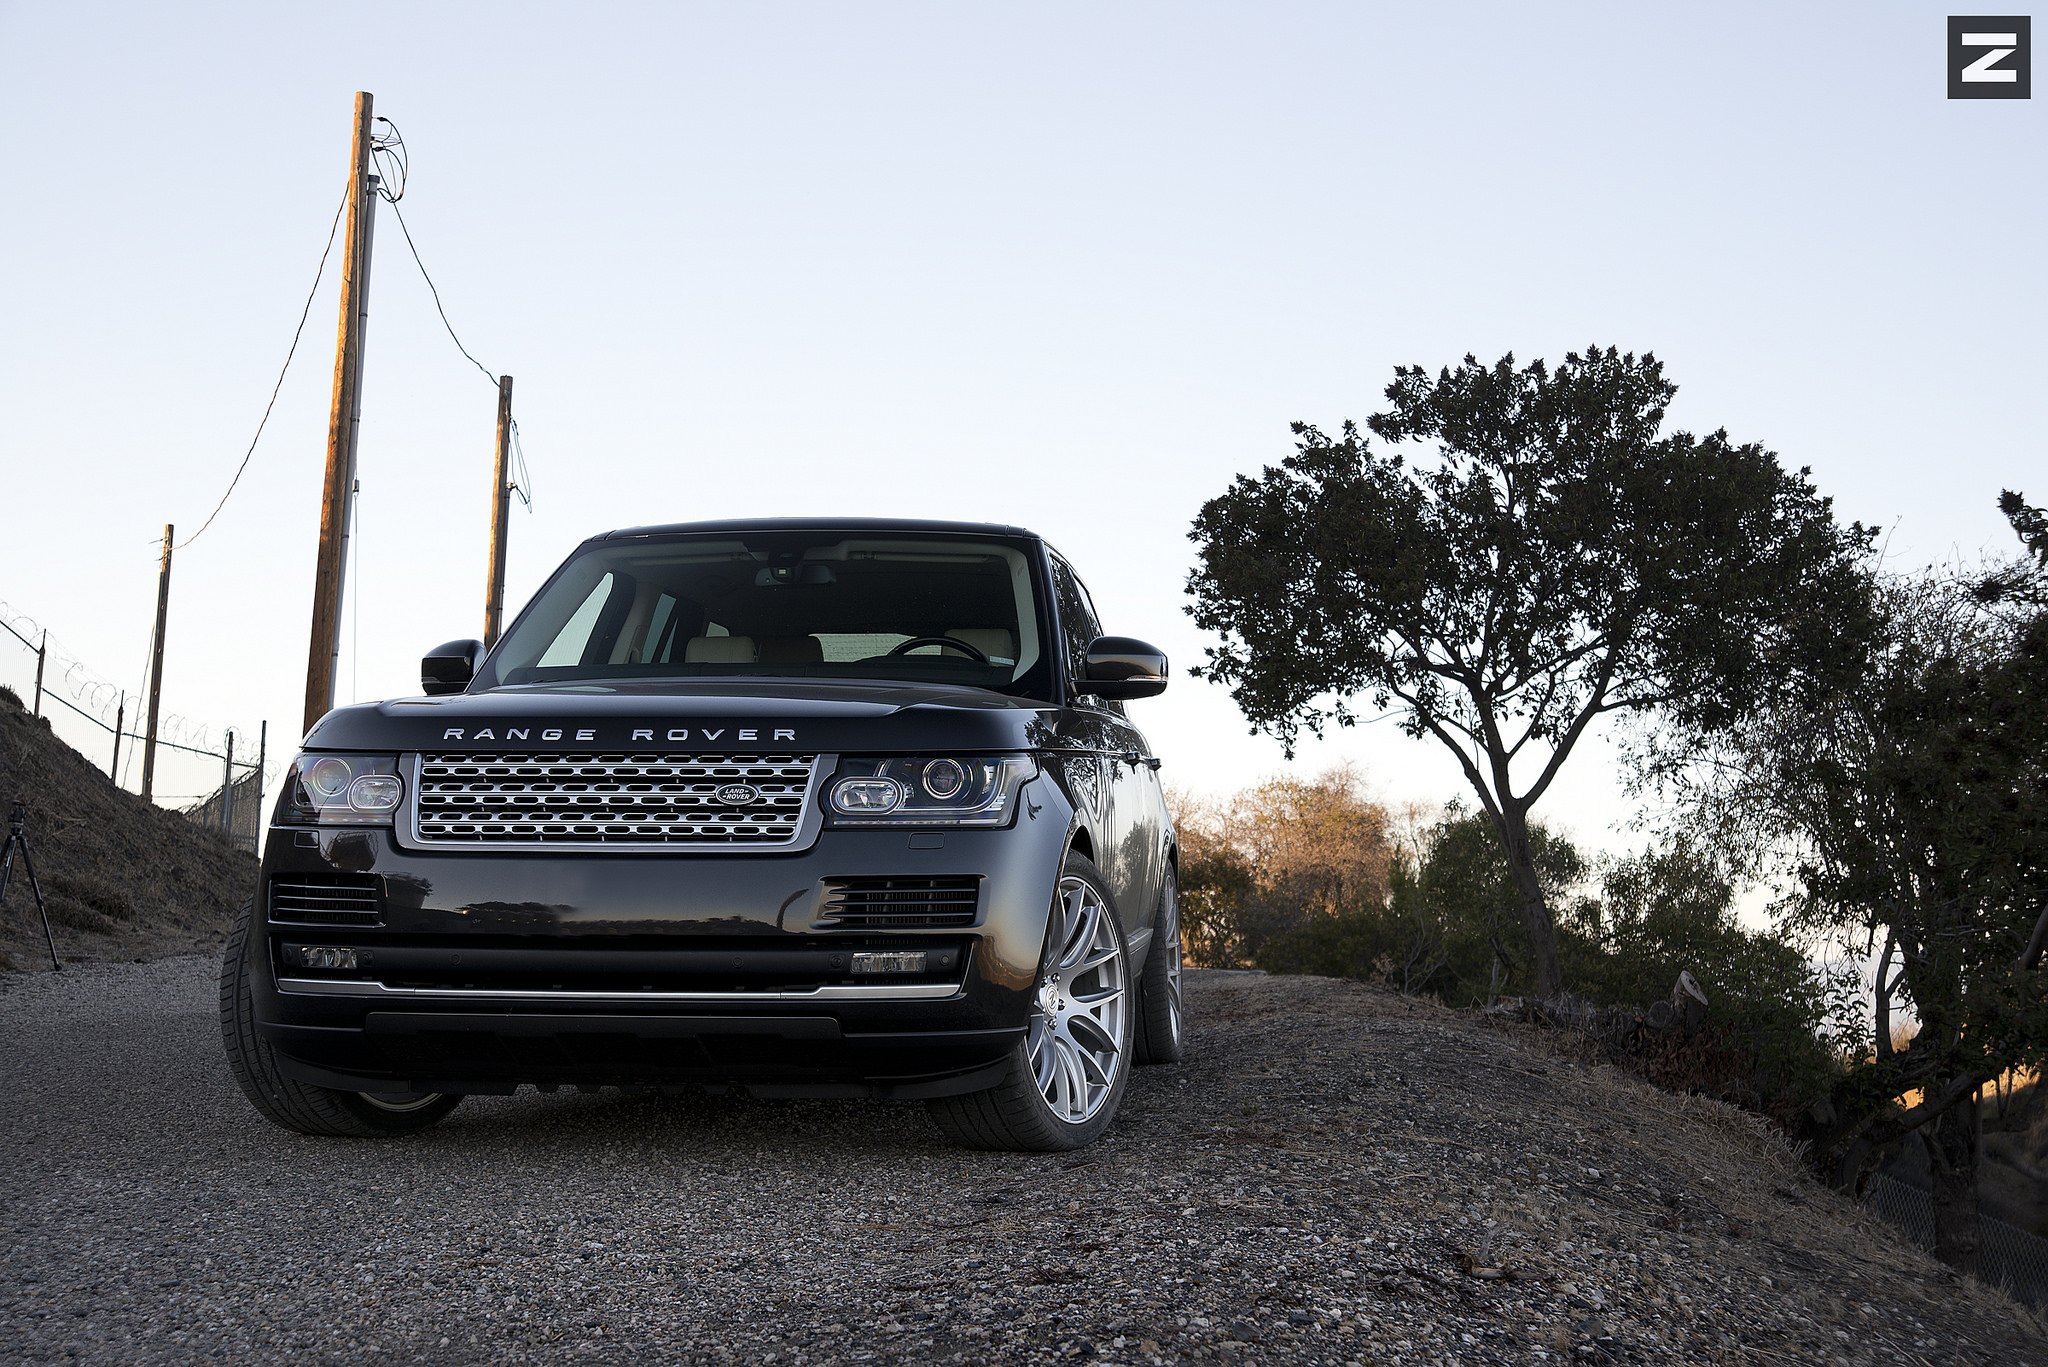 Chrome Mesh Grille on Black Range Rover - Photo by Zito Wheels